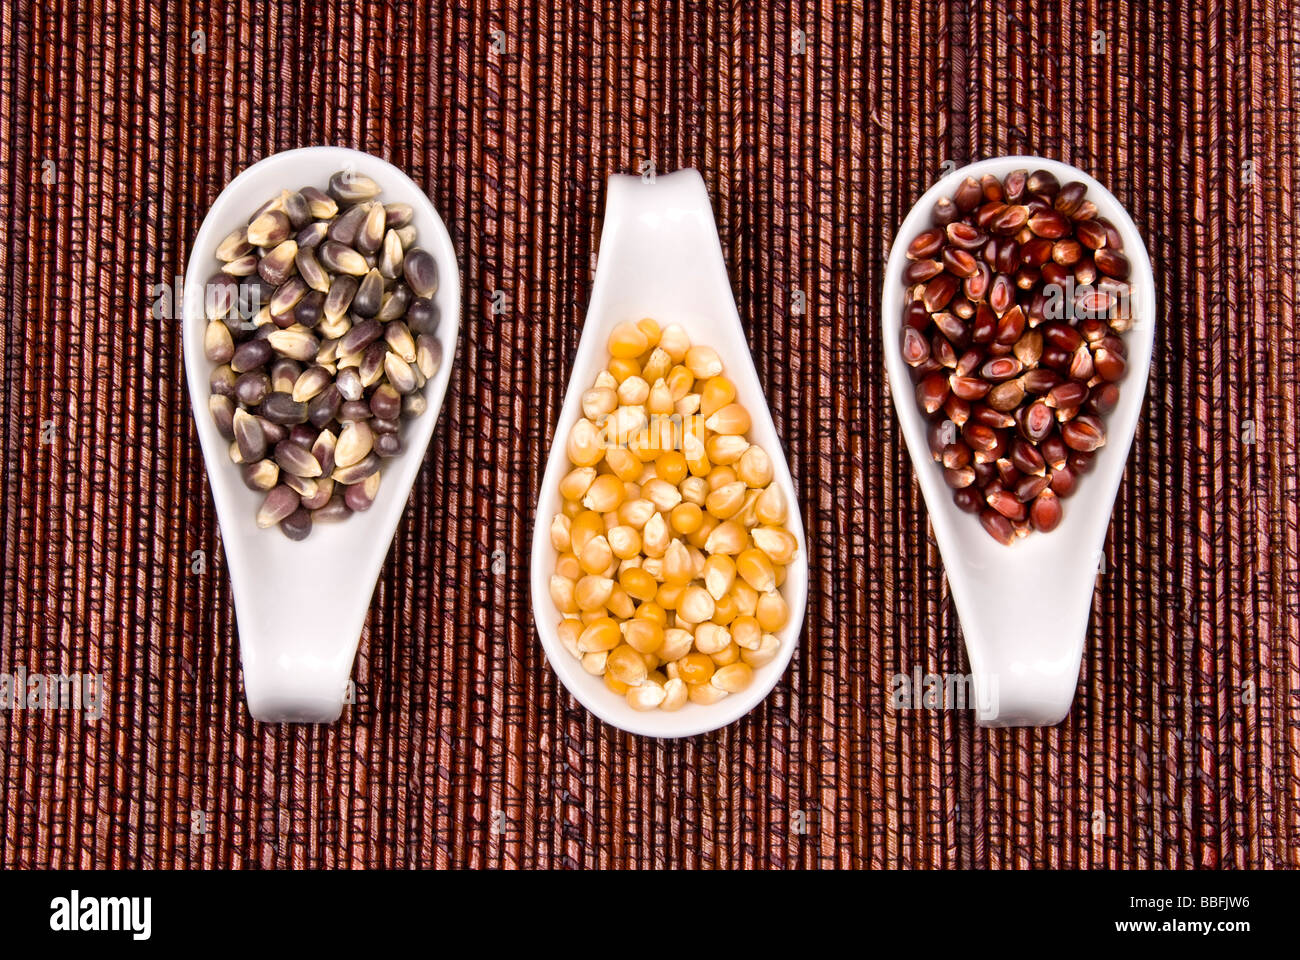 Three types of popcorn including crimson red black Jewell and classic yellow sit in spoonfulls on a bamboo place mat Stock Photo